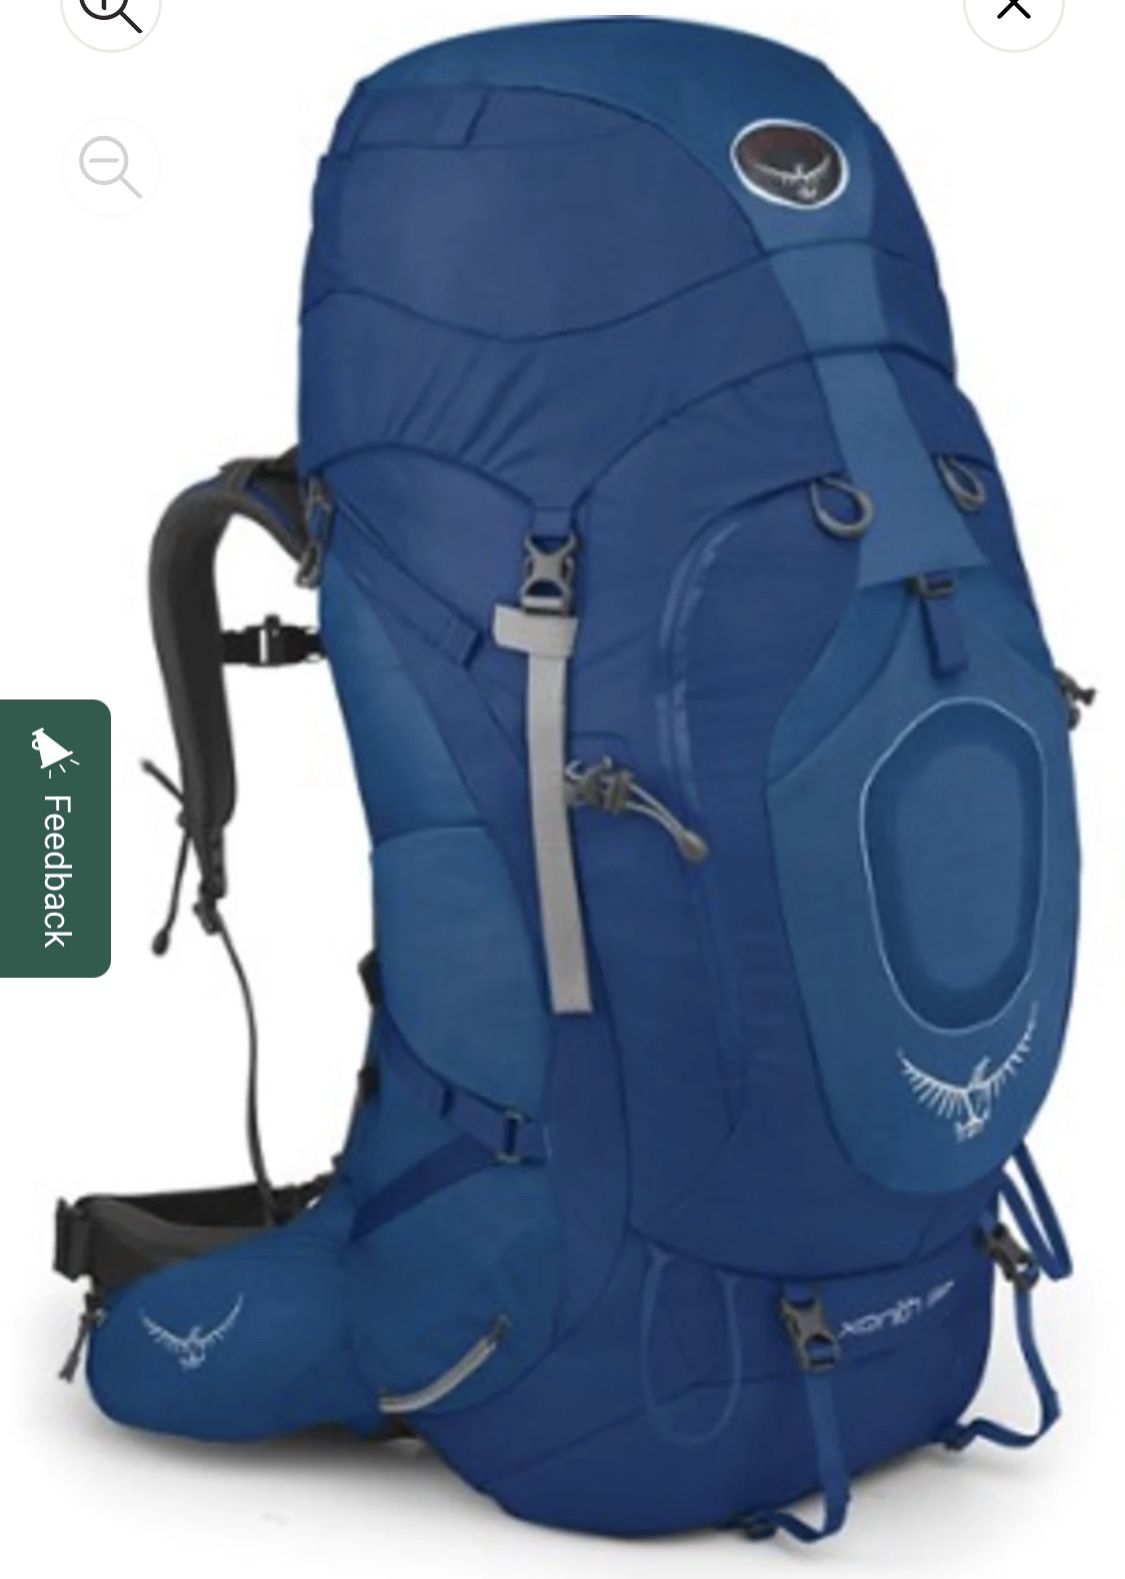 Osprey Xenith 88 Backpacking Bag